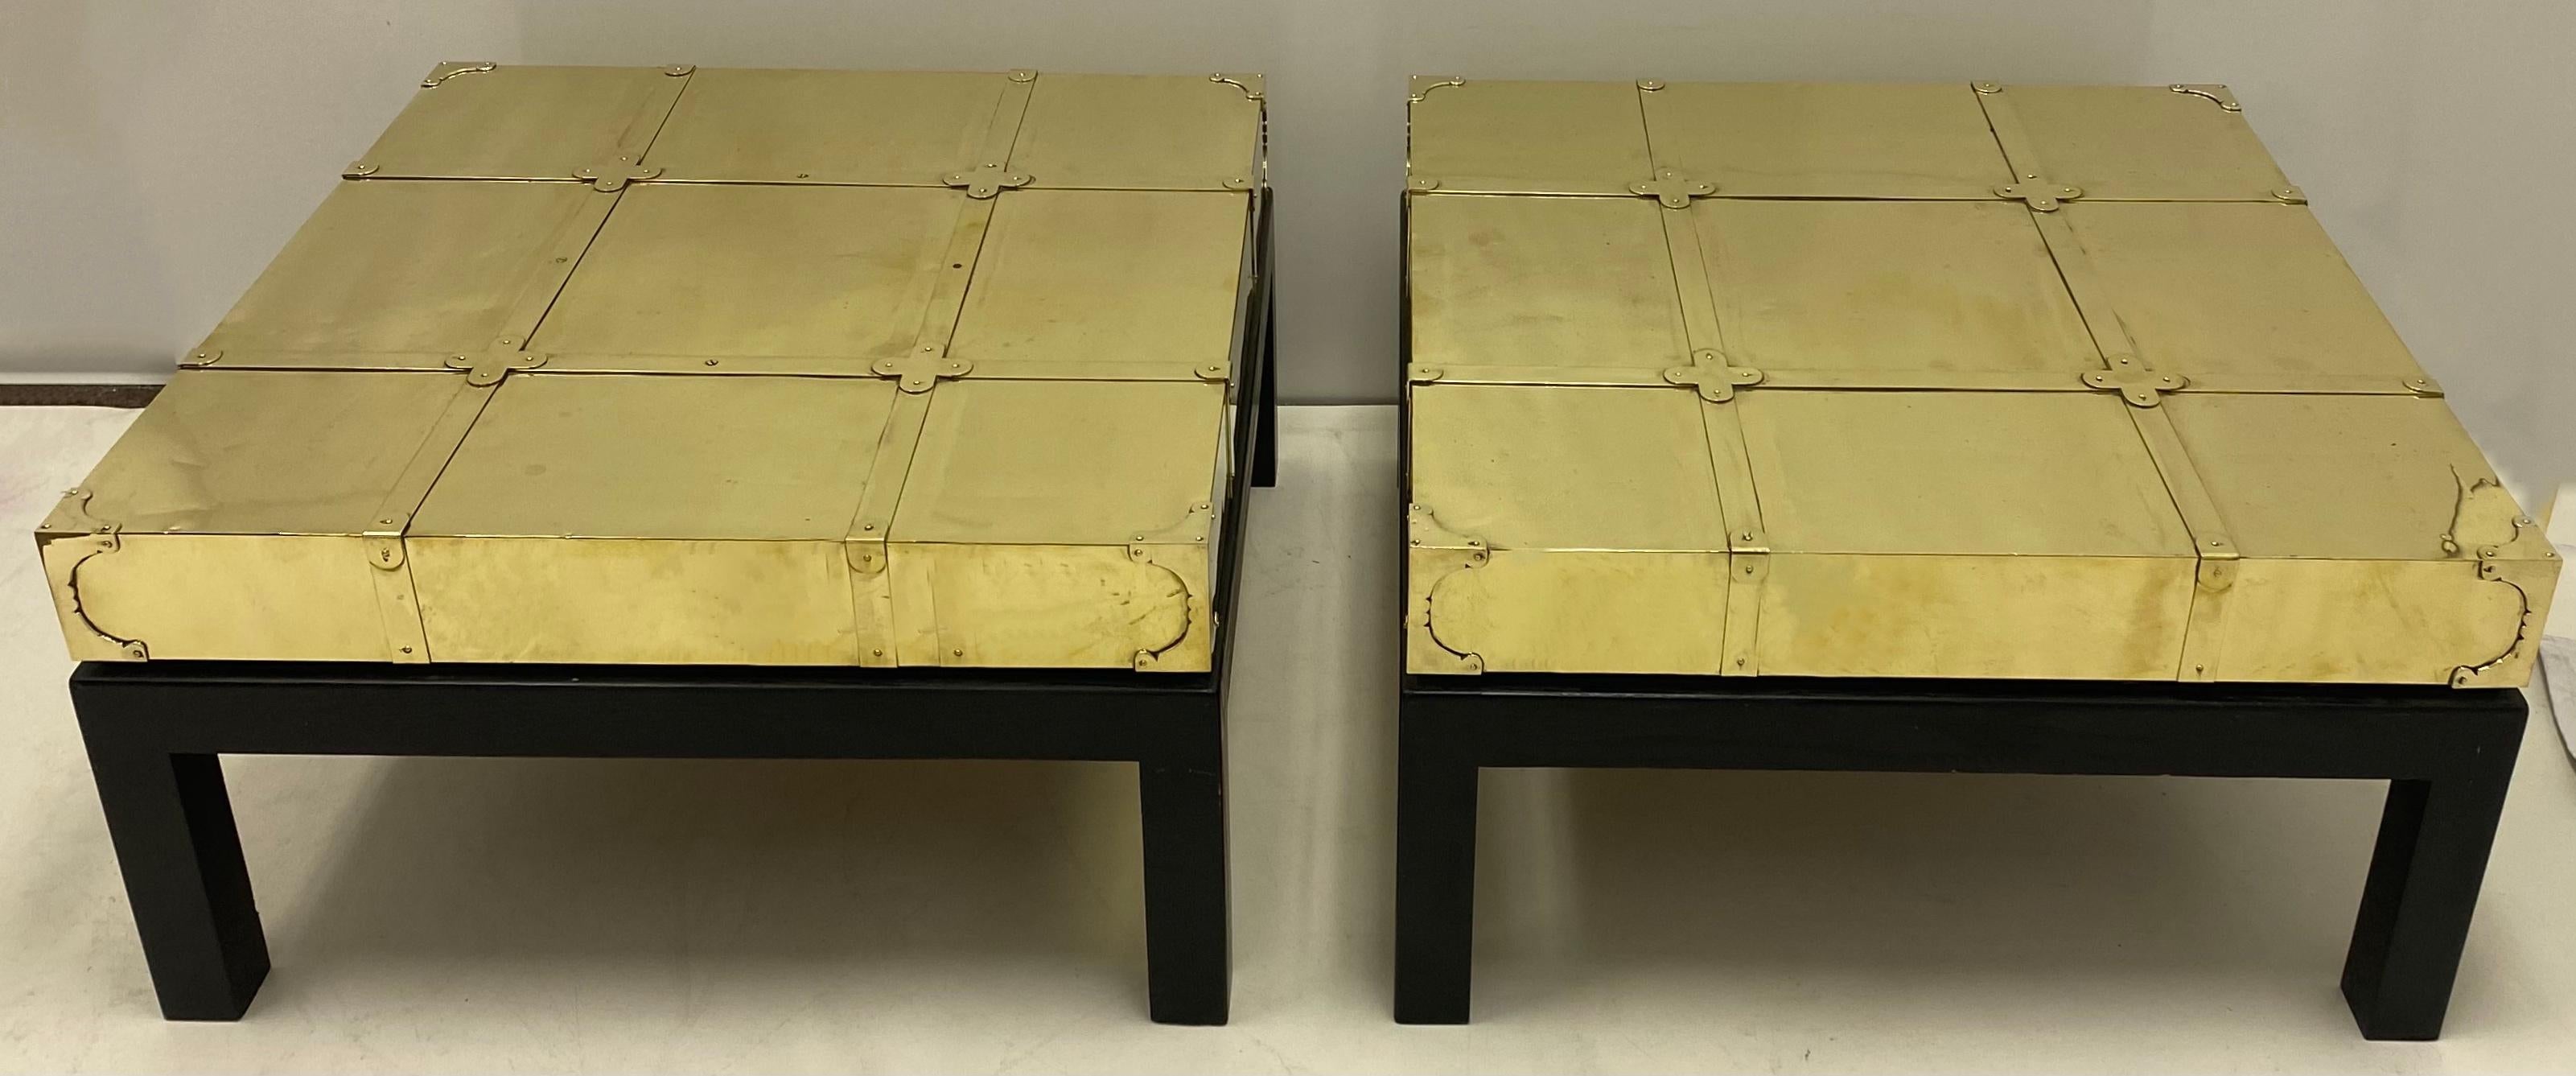 These Sarreid Ltd. side table date to the 1970s. They are unique in that they combine low profile modern styling with Asian and campaign influences. They are marked. The tables have been recently polished and will age into a deep antique brass look